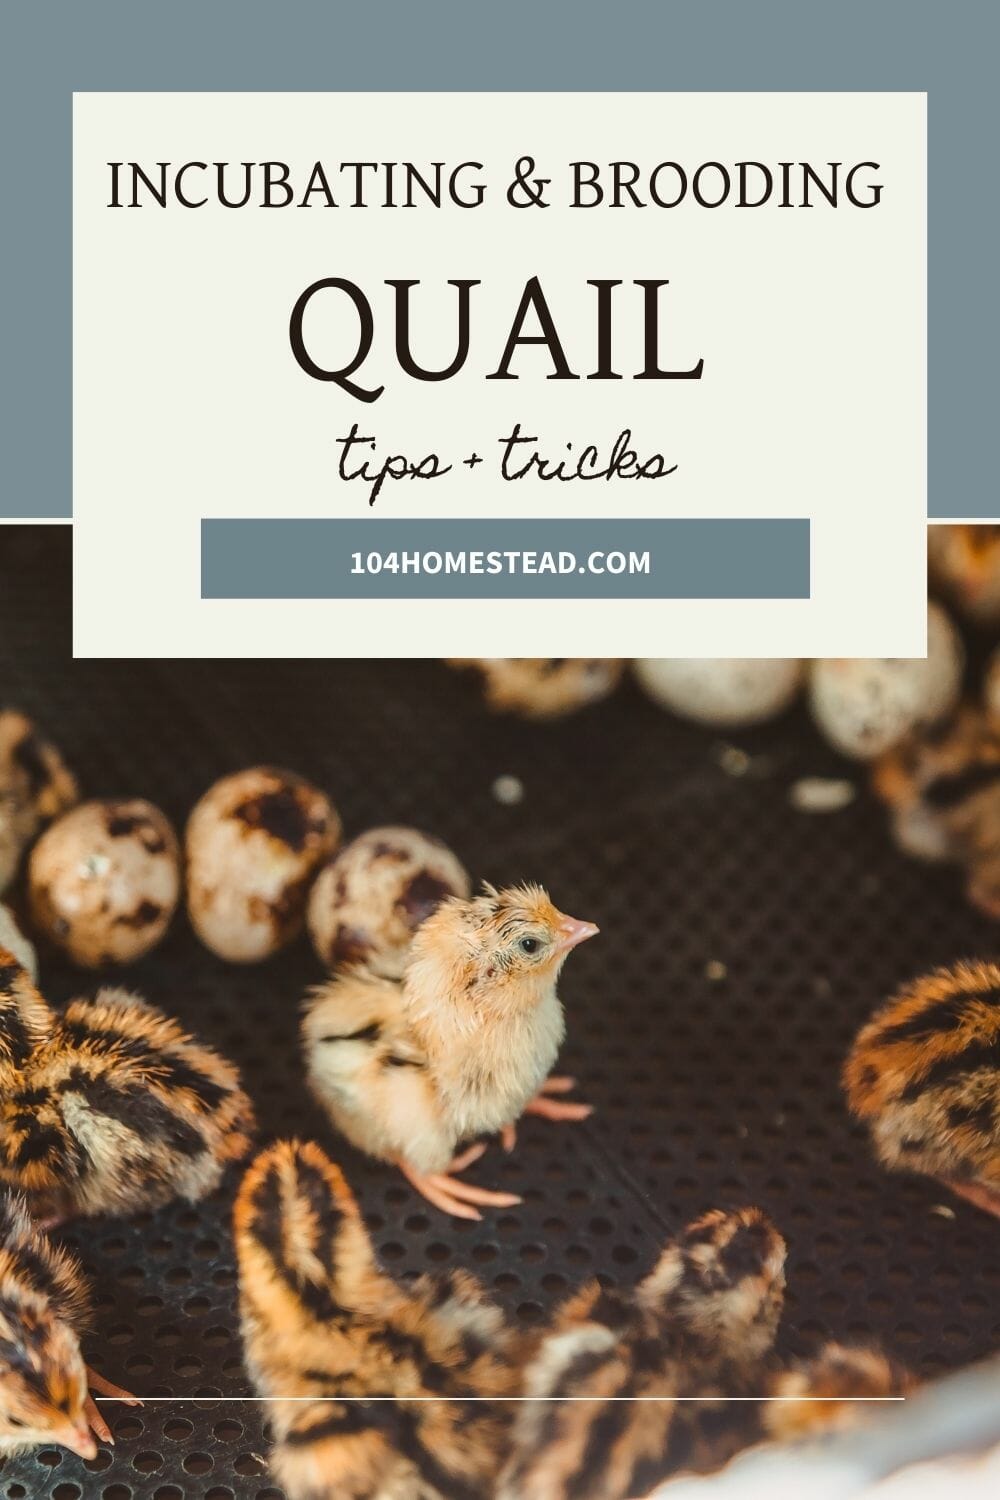 A pinterest-friendly graphic for how to incubate quail eggs and brood quail chicks.